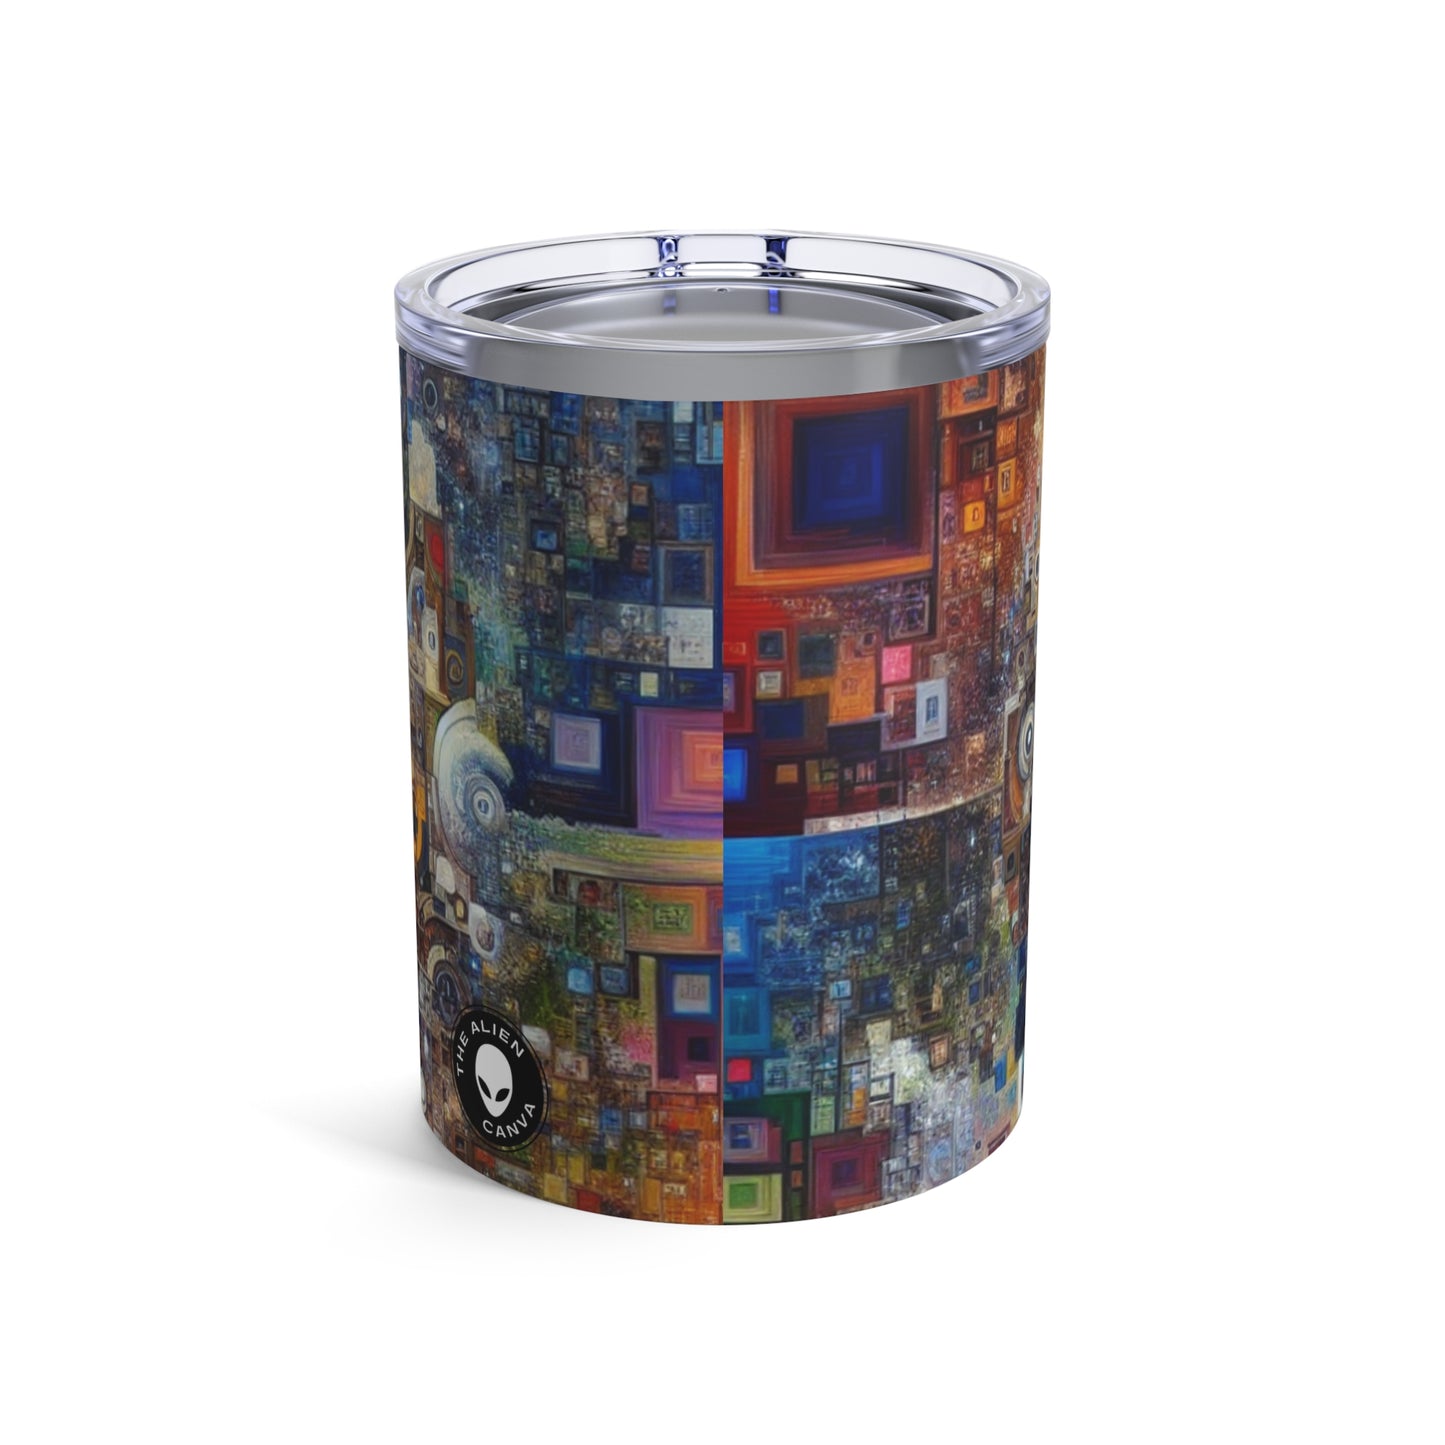 "Perception Distorted: A Postmodern Commentary on Reality" - The Alien Tumbler 10oz Postmodern Art